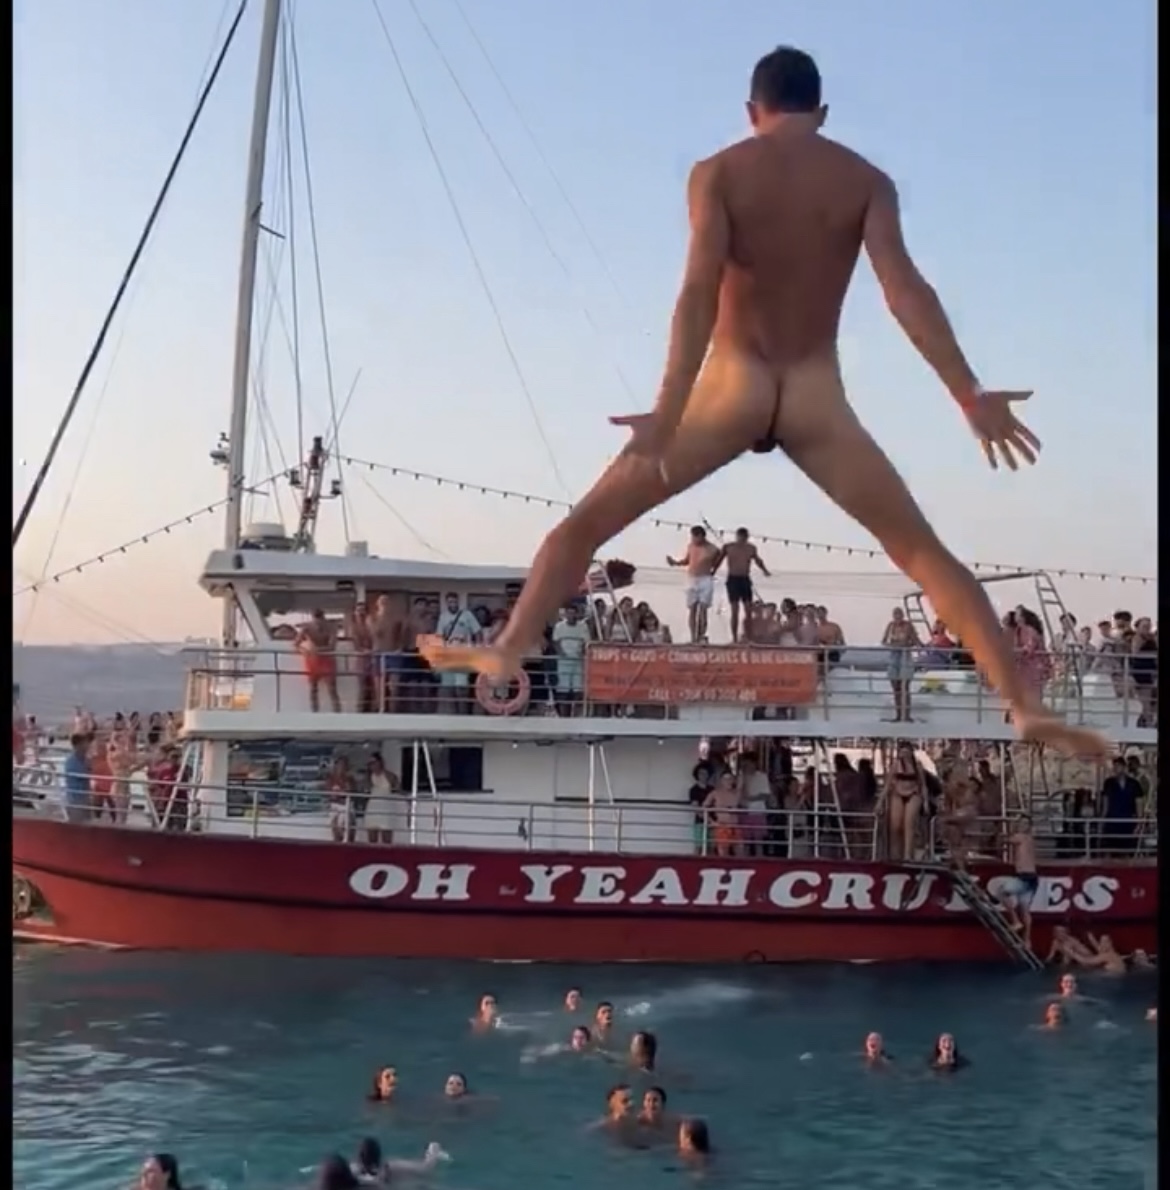 Hot straight guys jumping naked from a boat